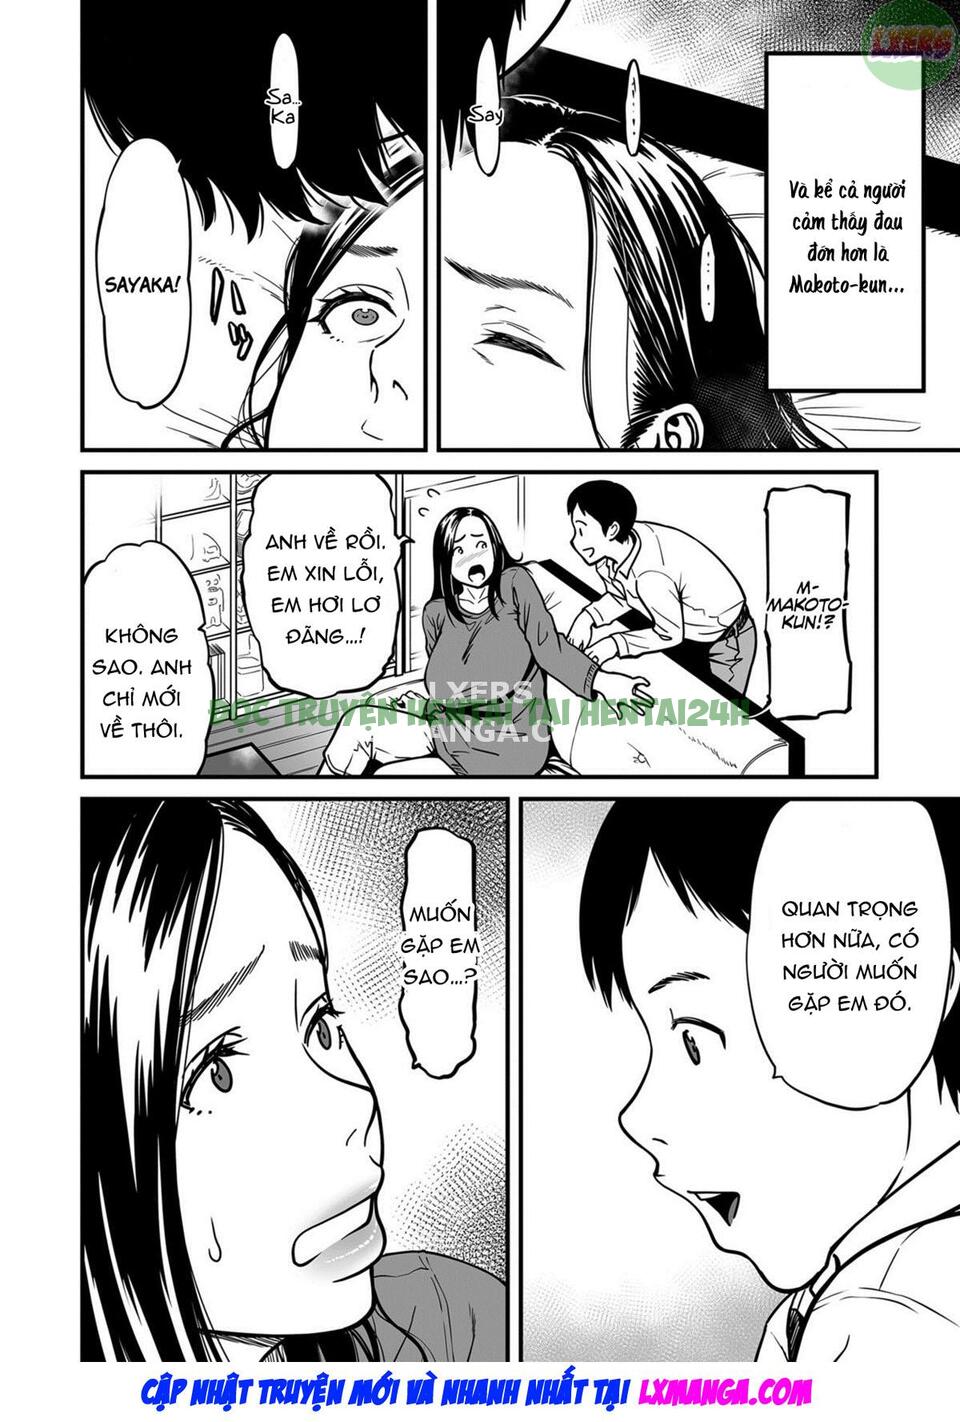 Xem ảnh It’s Not A Fantasy That The Female Erotic Mangaka Is A Pervert - Chapter 7 END - 4 - Hentai24h.Tv